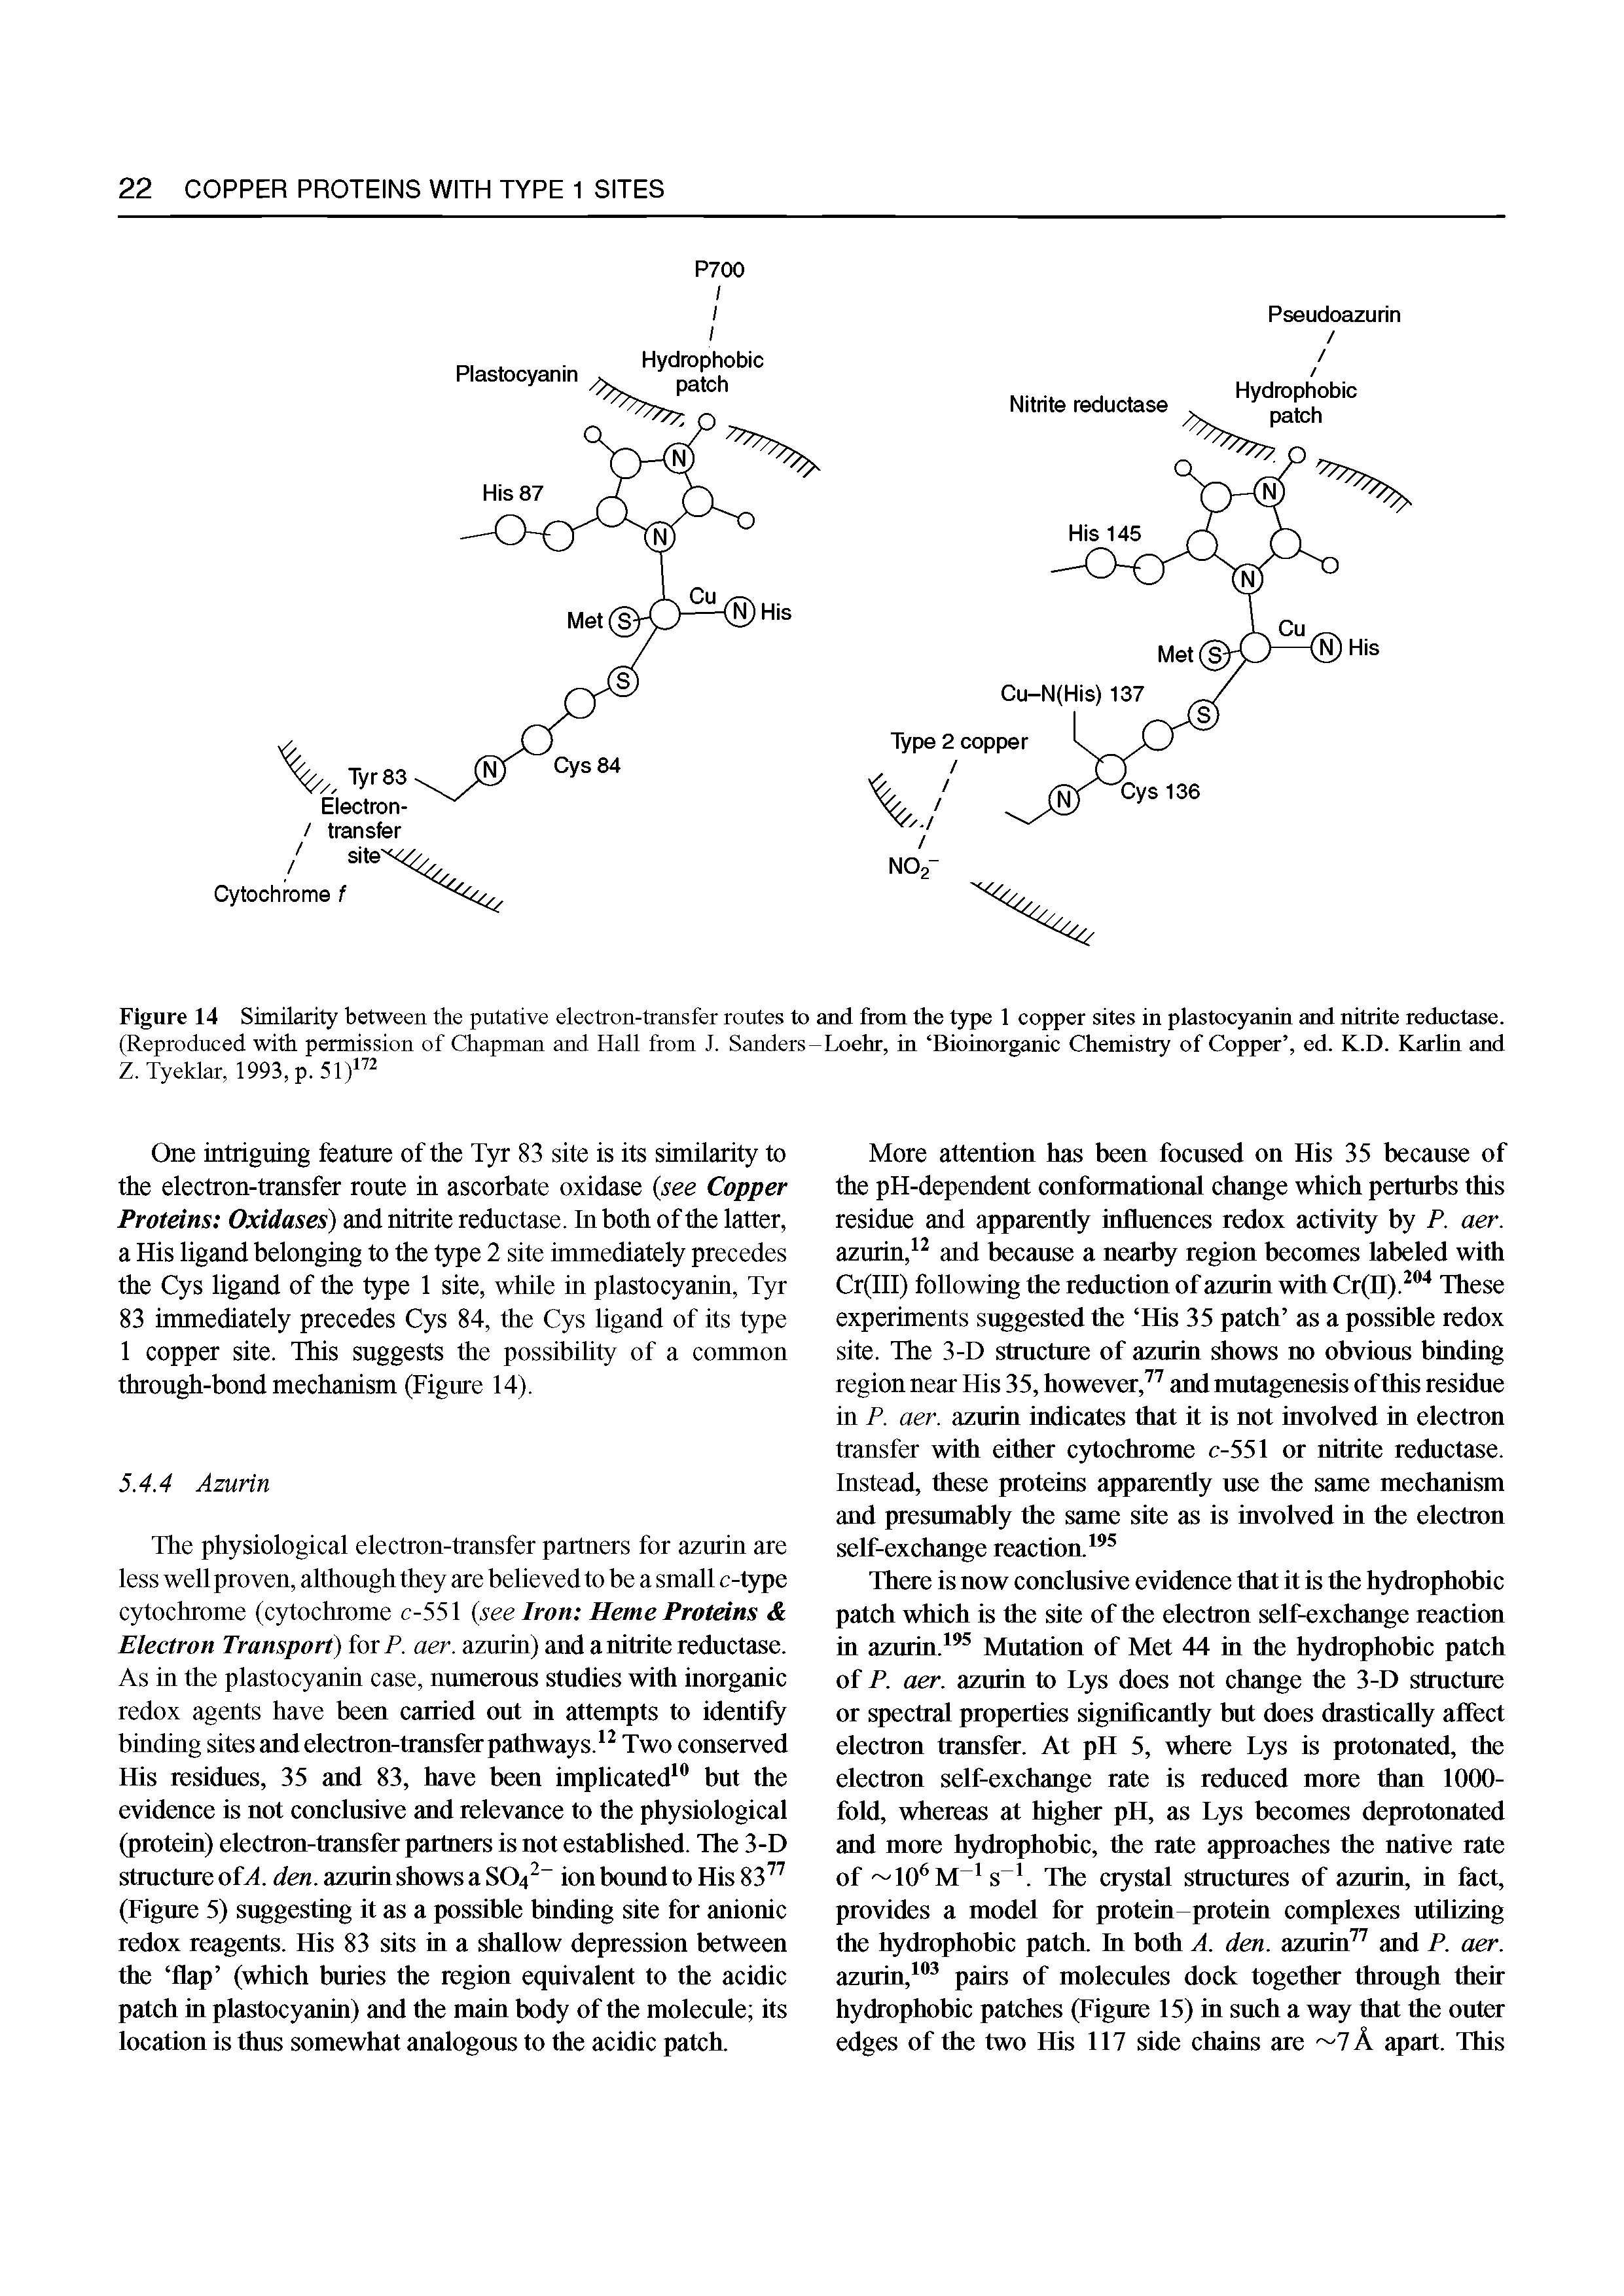 Figure 14 Similarity between the putative electron-transfer routes to and from the type 1 copper sites in plastocyanin and nitrite reductase. (Reproduced with permission of Chapman and Hall from J. Sanders-Loehr, in Bioinorganic Chemistry of Copper , ed. K.D. Karlin and Z. Tyeklar, 1993, p. 51) ...